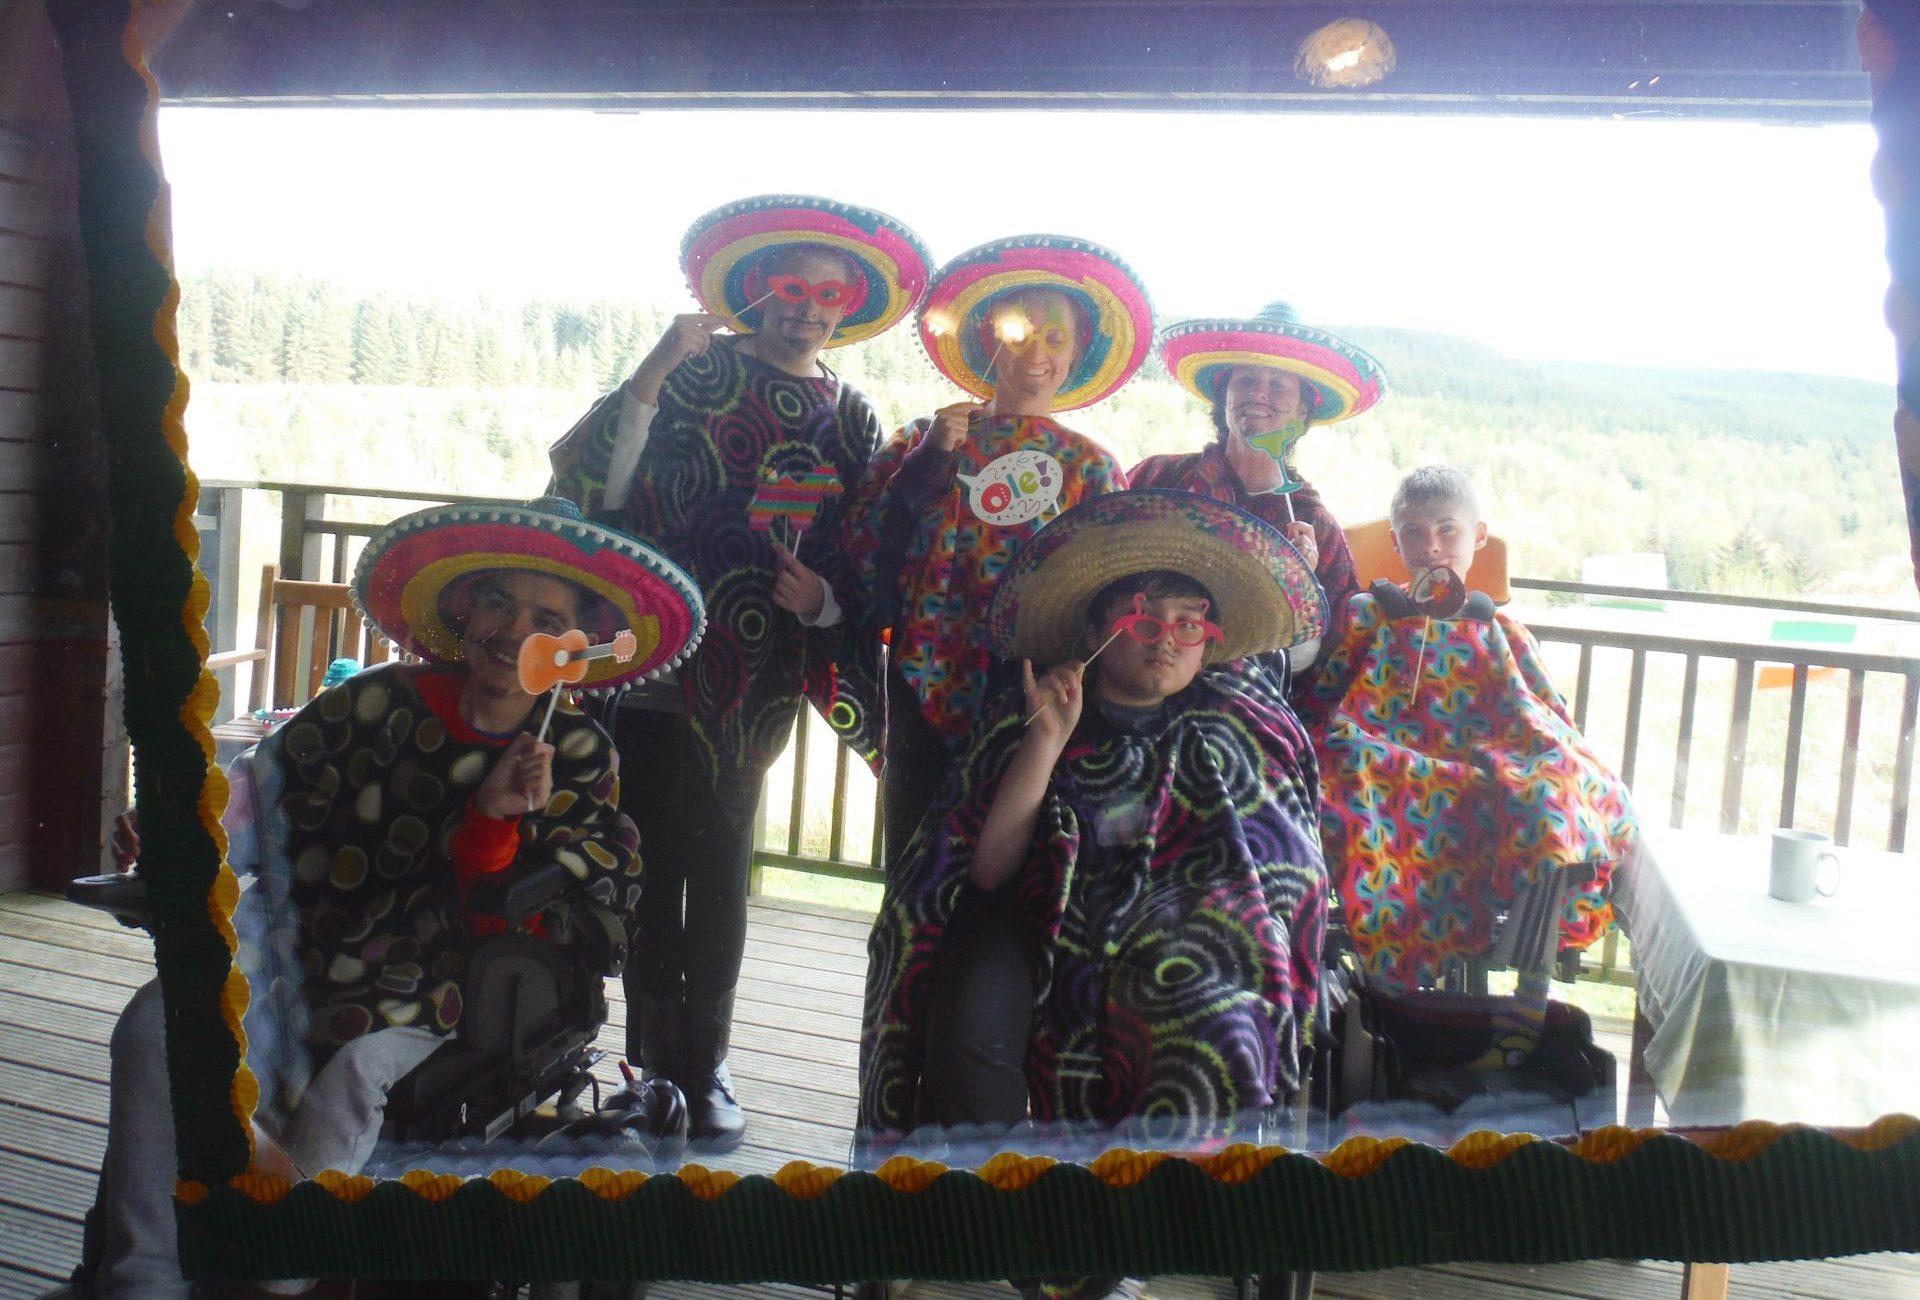 People in Mexican party clothes